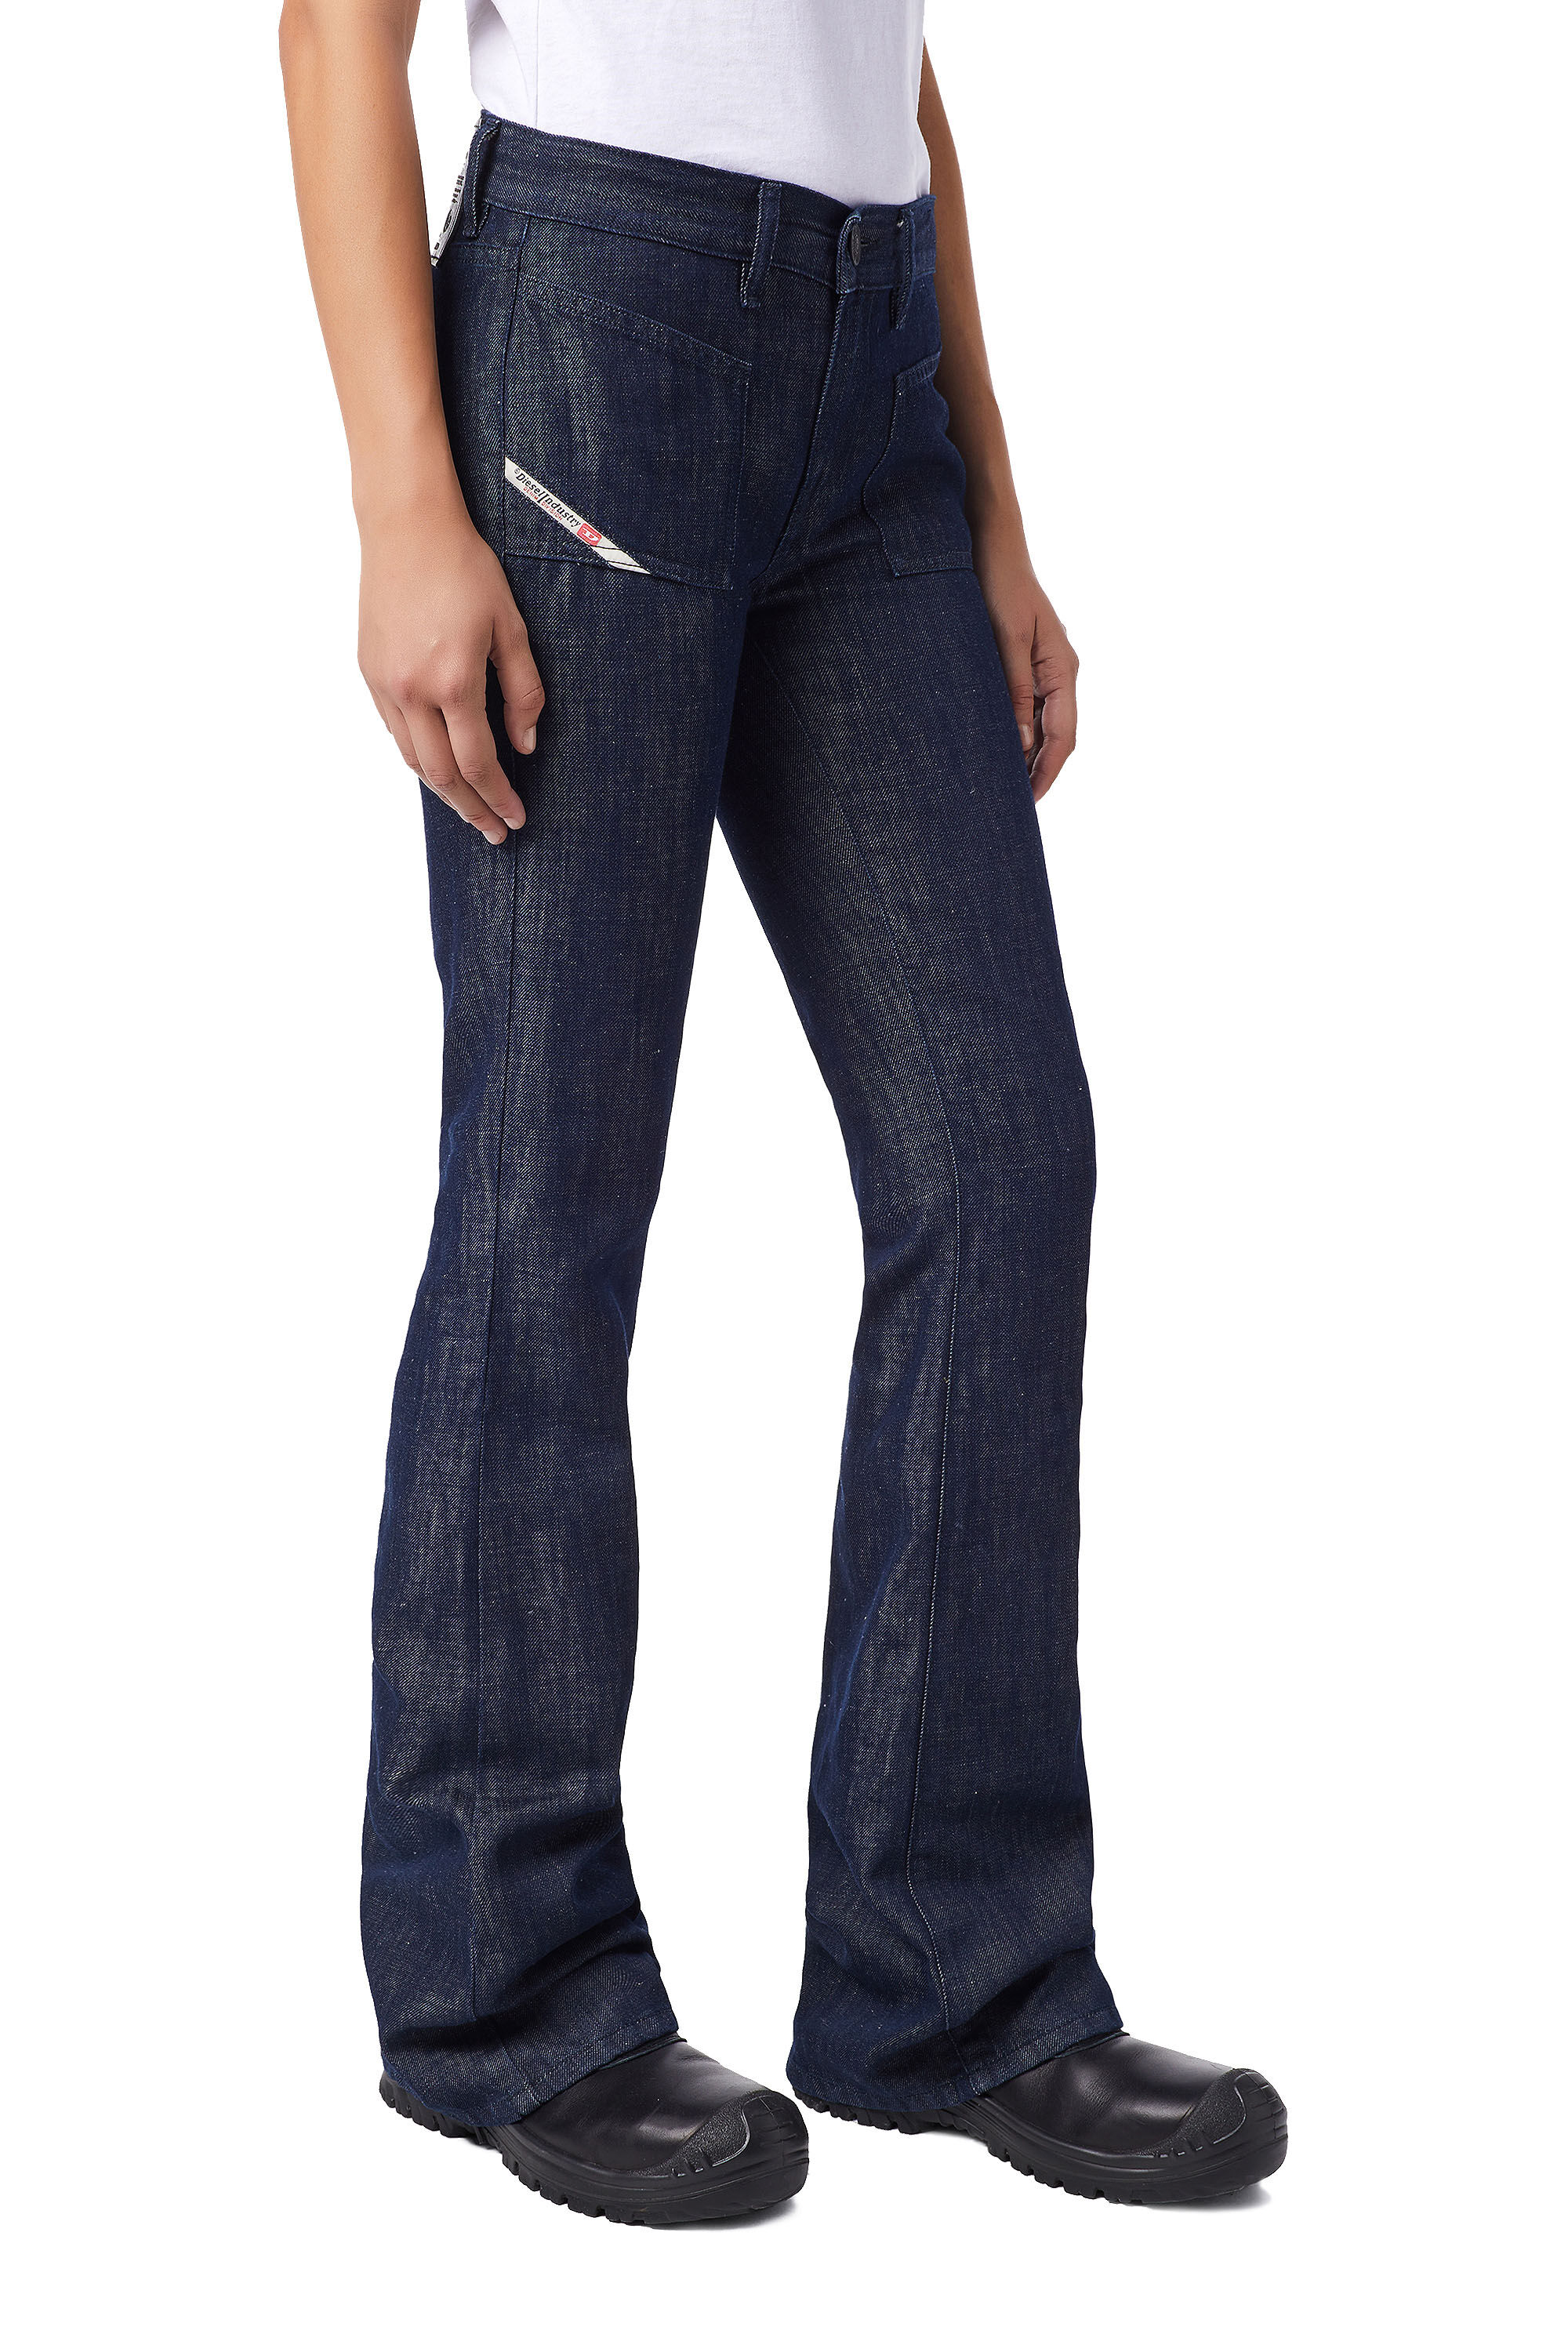 Diesel - 1969 D-EBBEY Z9B15 Bootcut and Flare Jeans,  - Image 7